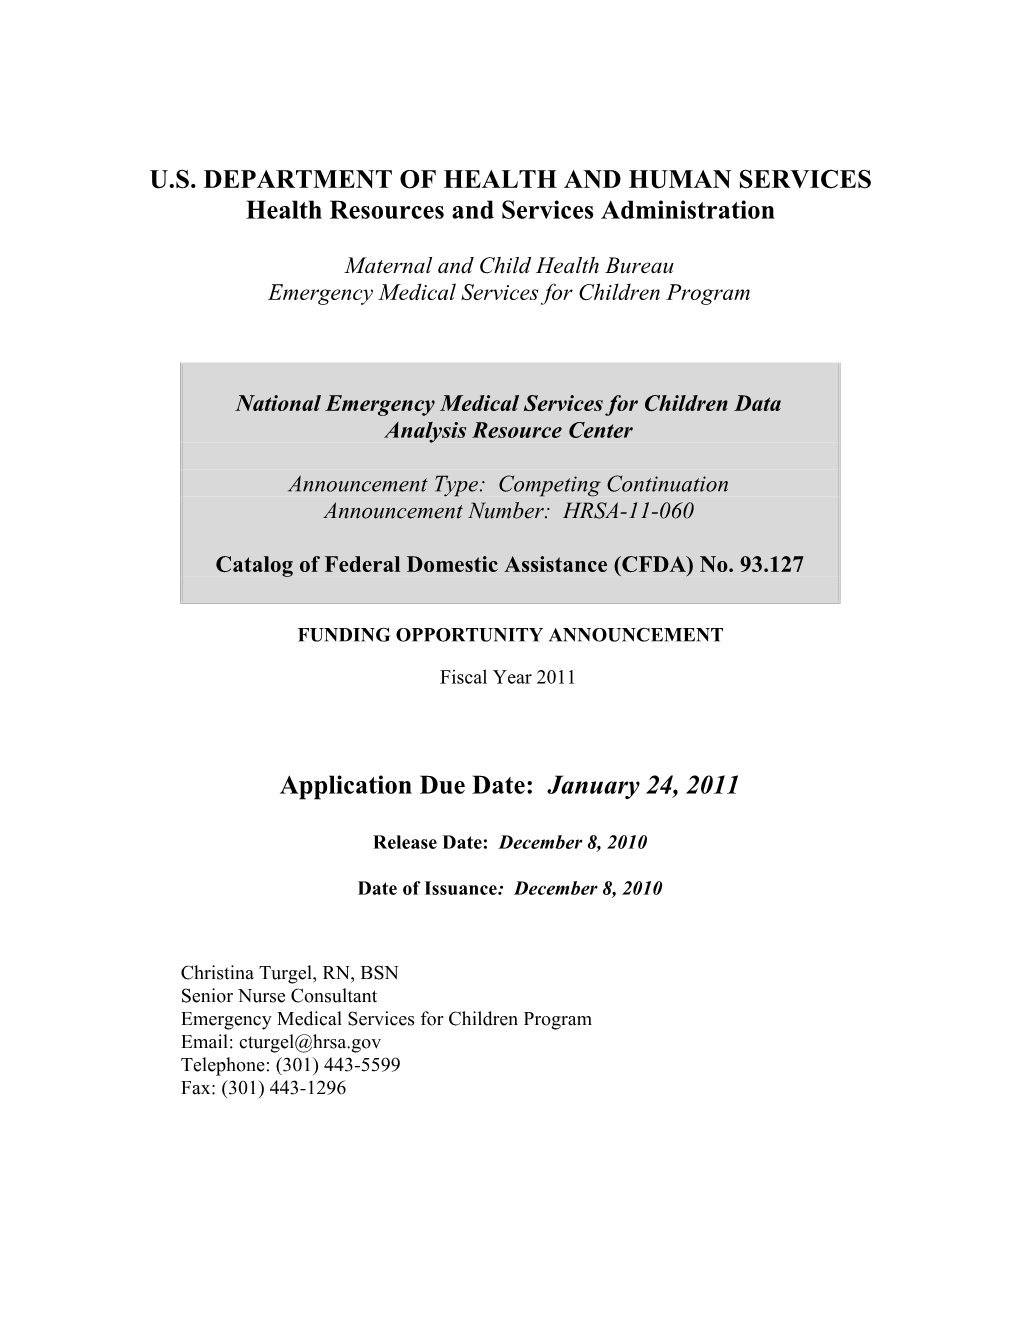 U.S. Department of Health and Human Services s16